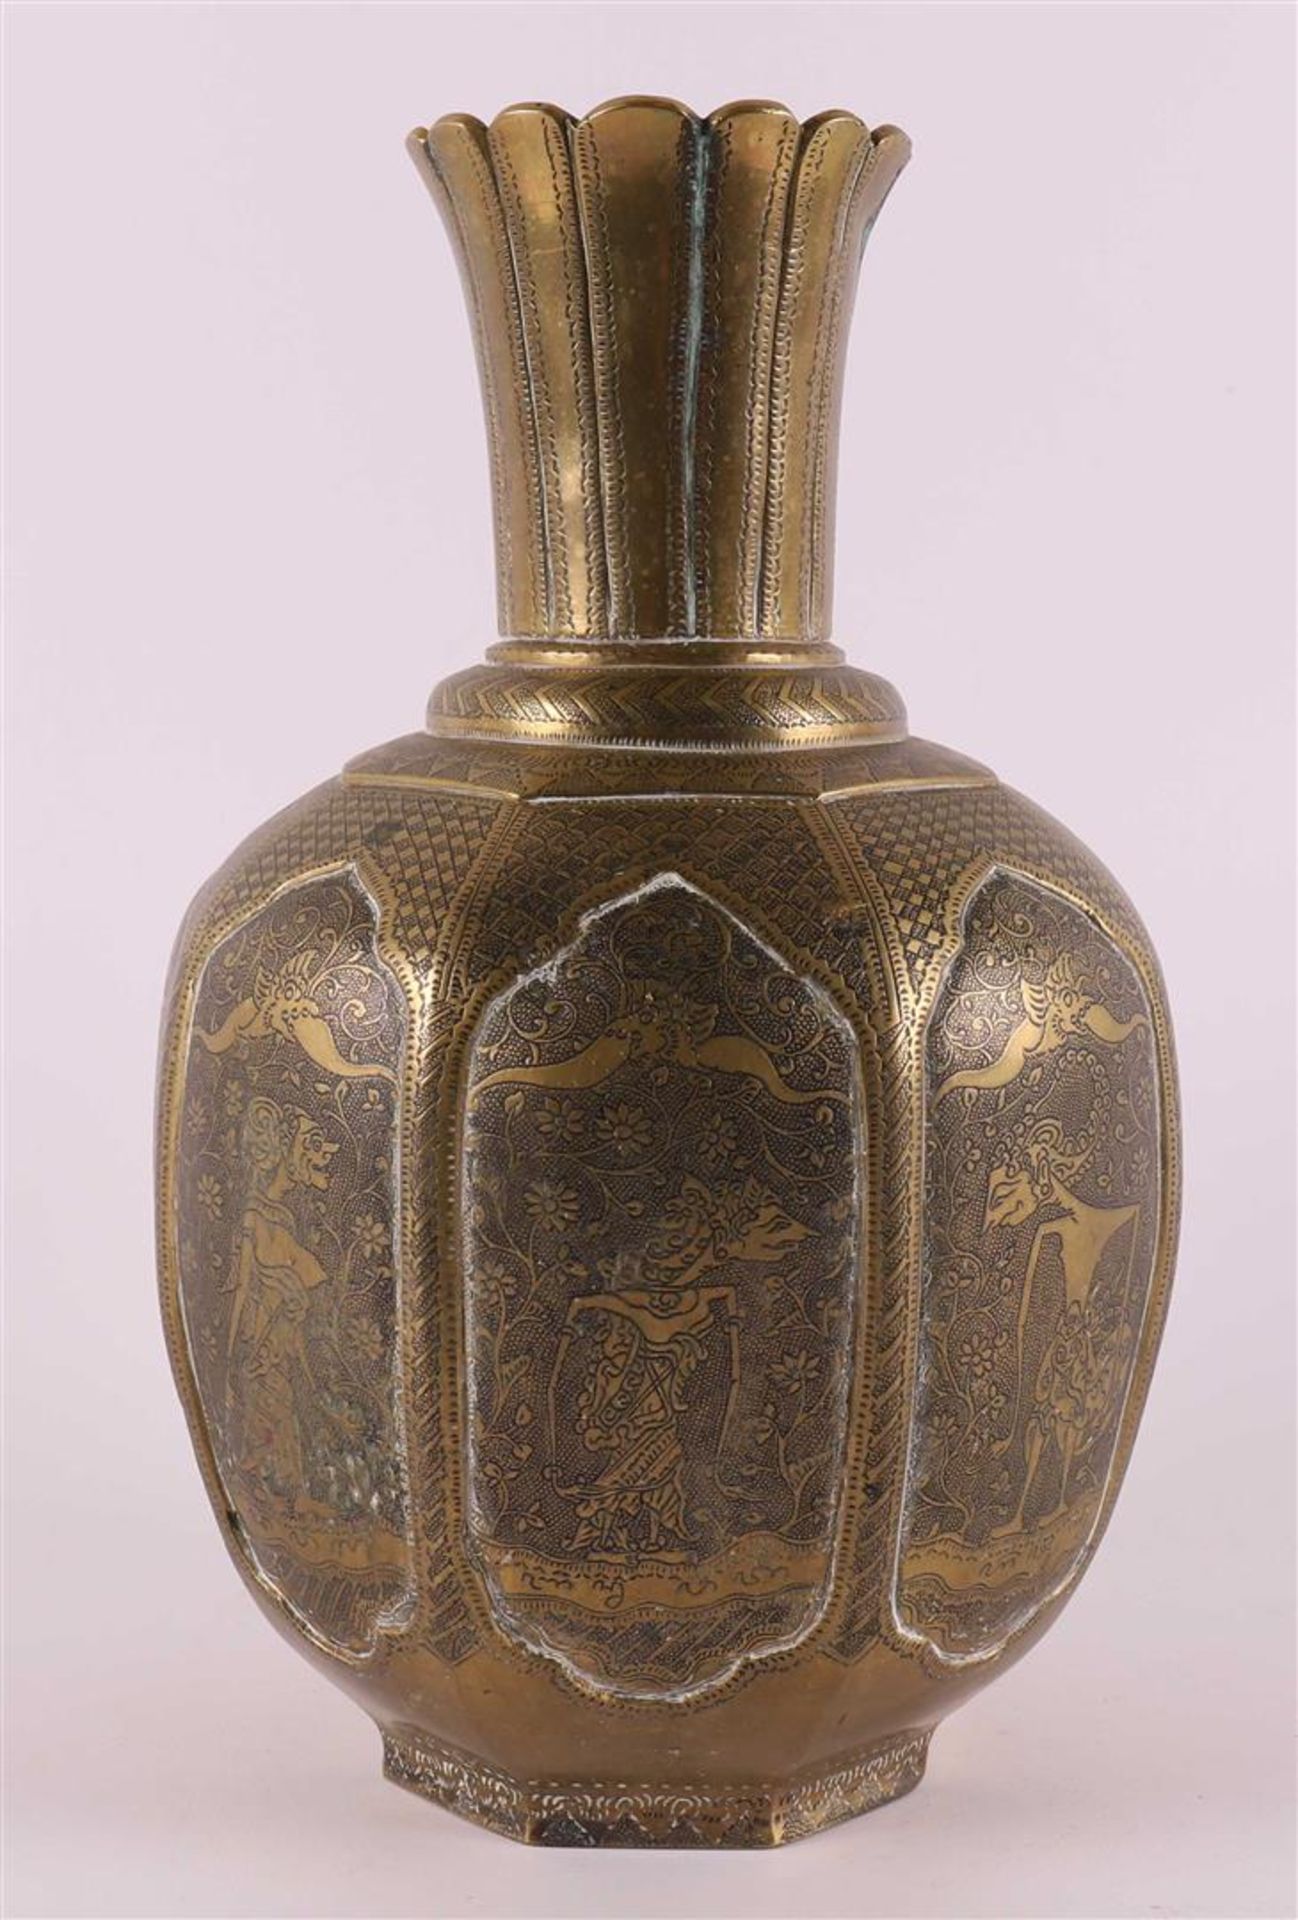 A brass baluster-shaped vase, India, 1st half of the 20th century. - Image 2 of 4